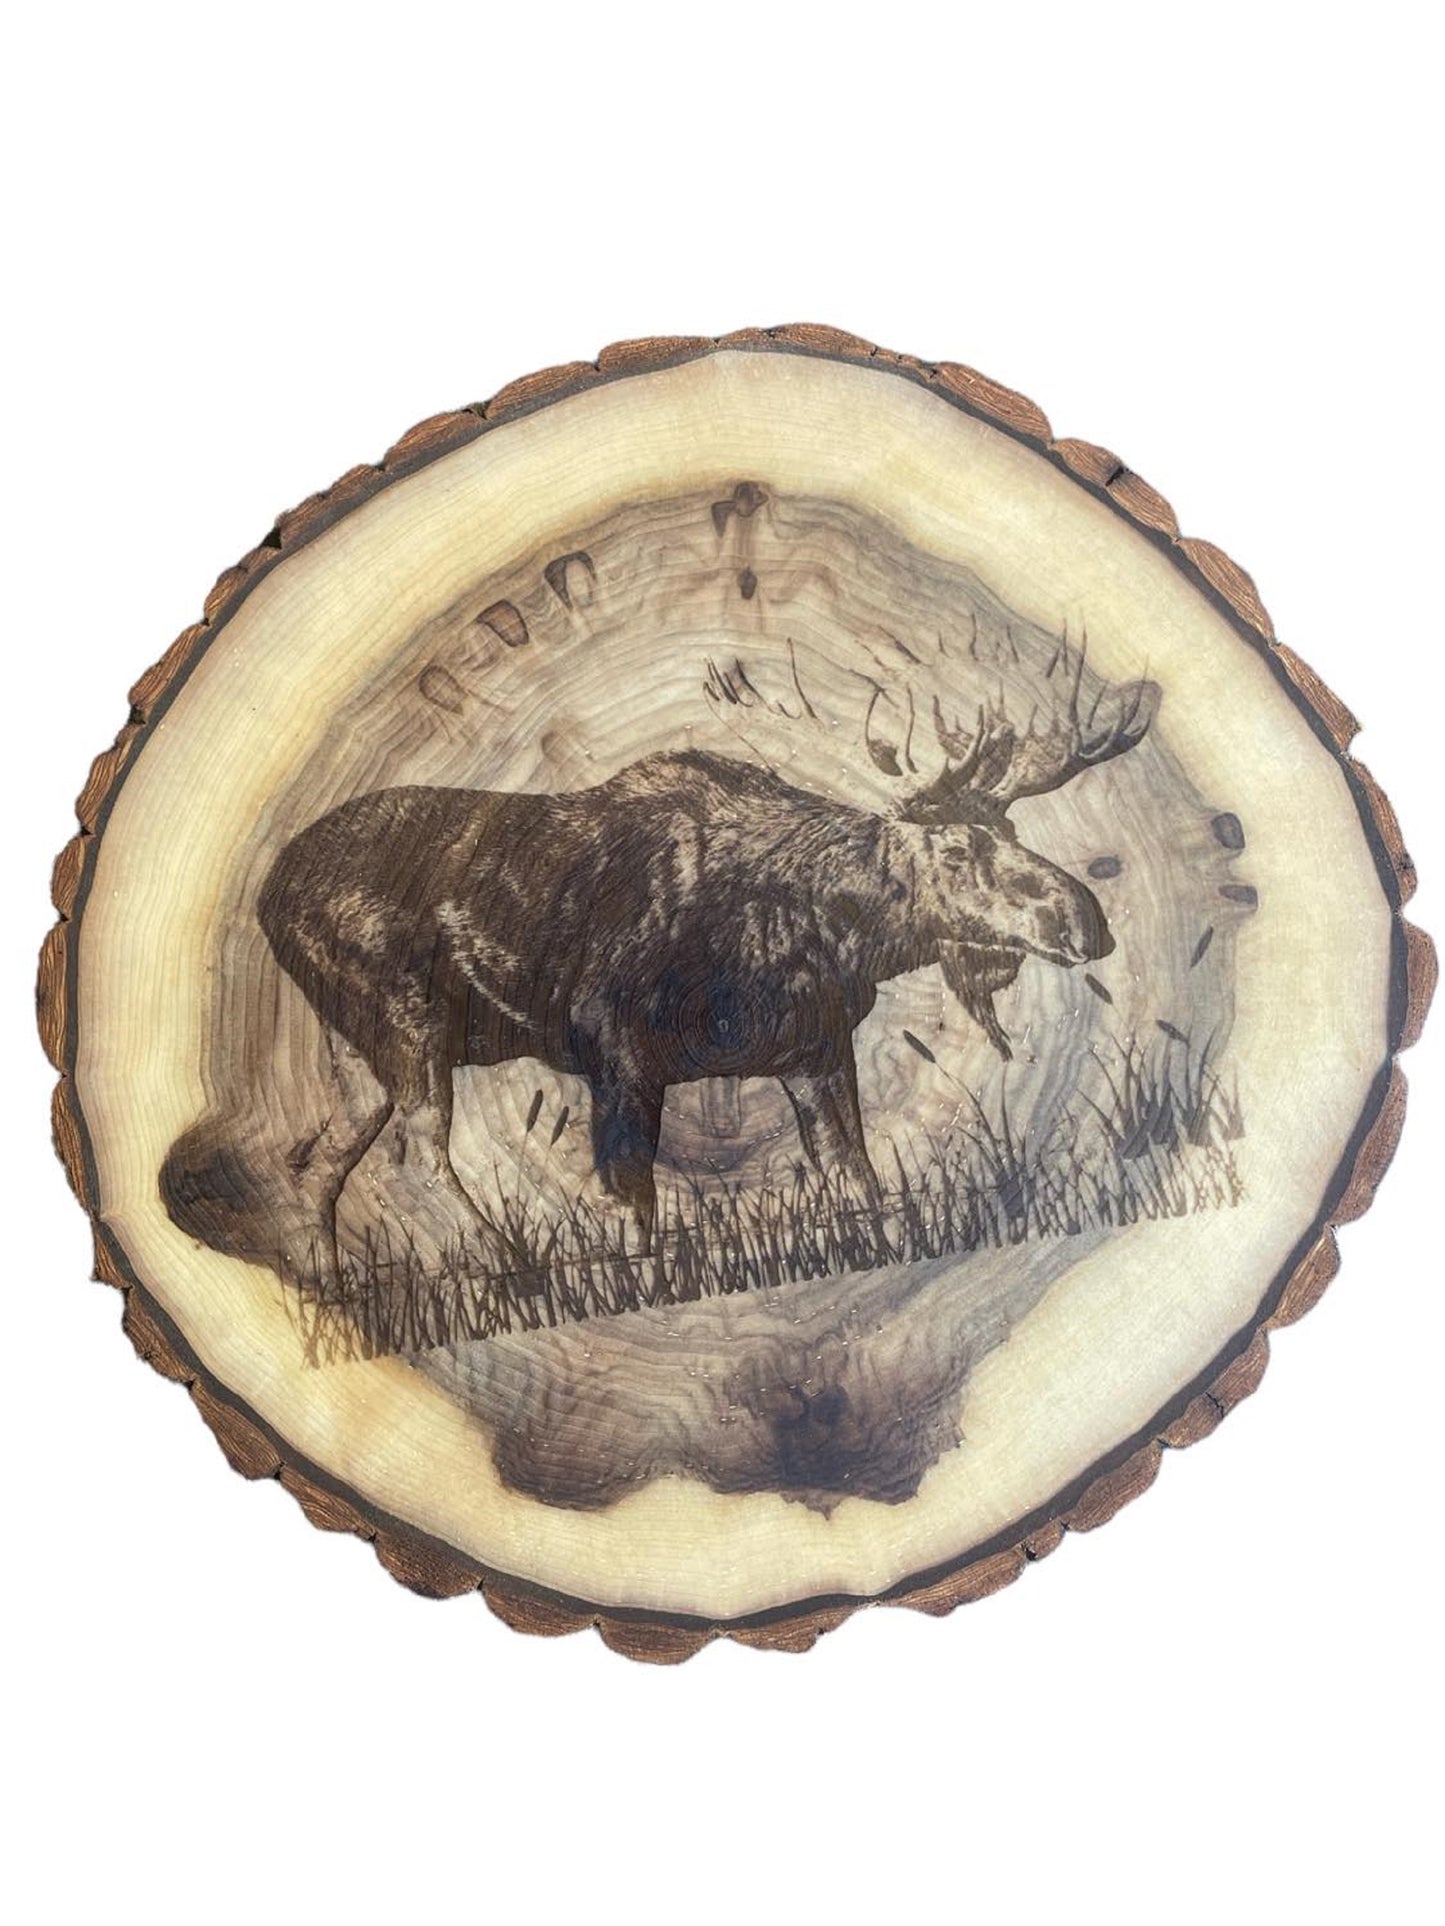 Moose Engraved Rustic Wood Slab, Charcuterie boards, Cutting Boards, Cake Stands, Serving Platters or Center Pieces With Bark